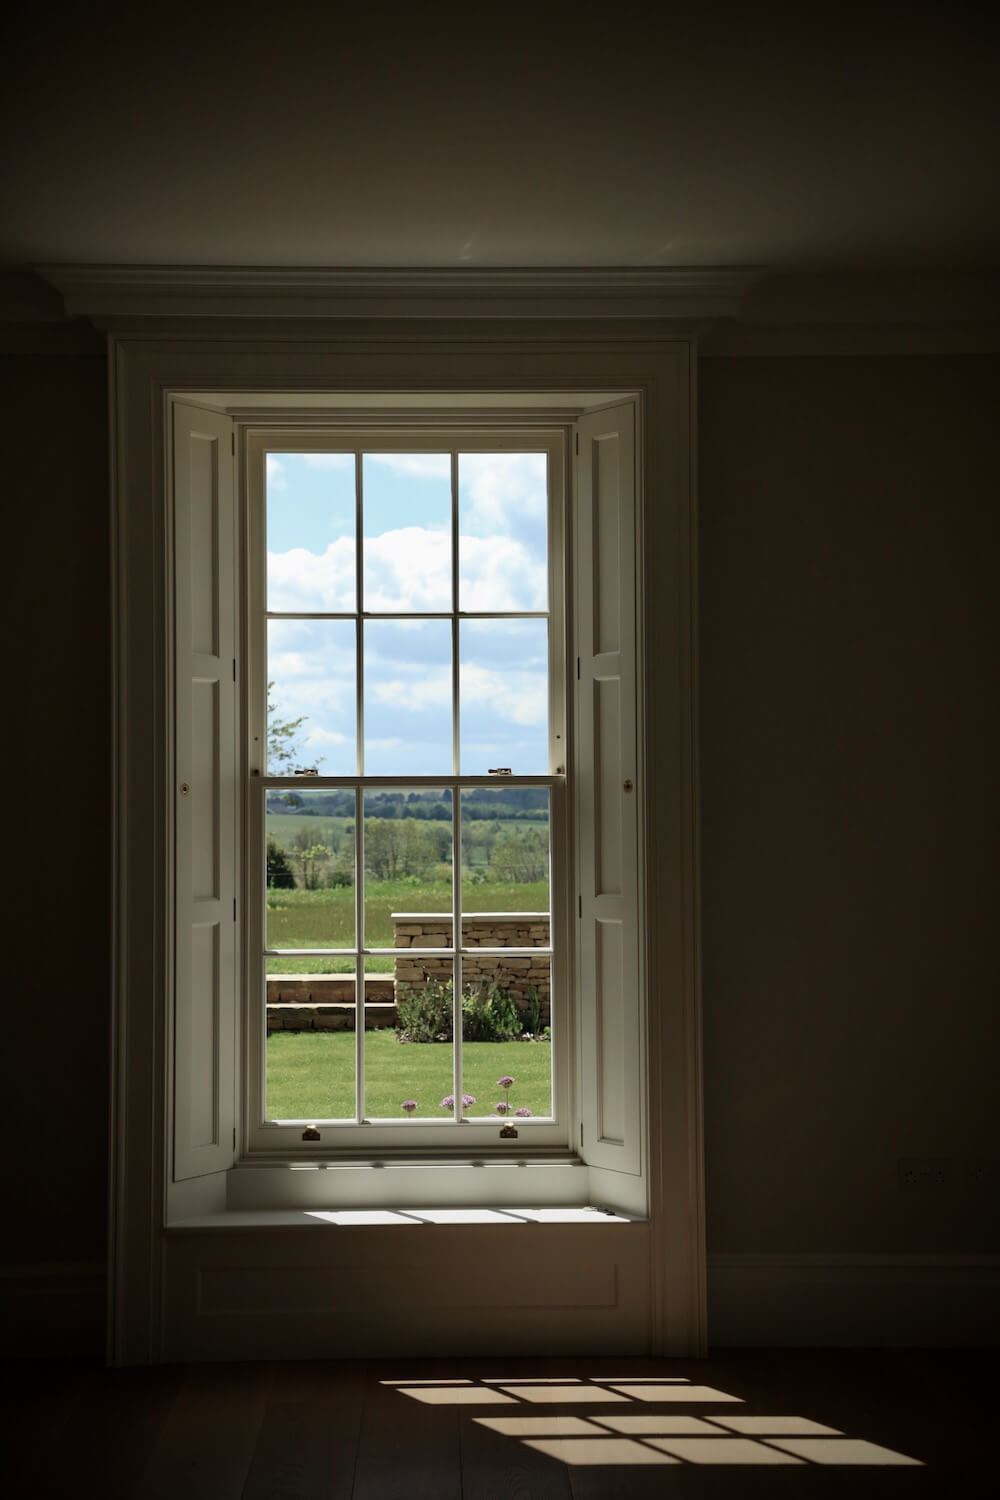 The view through the window at sibford park 